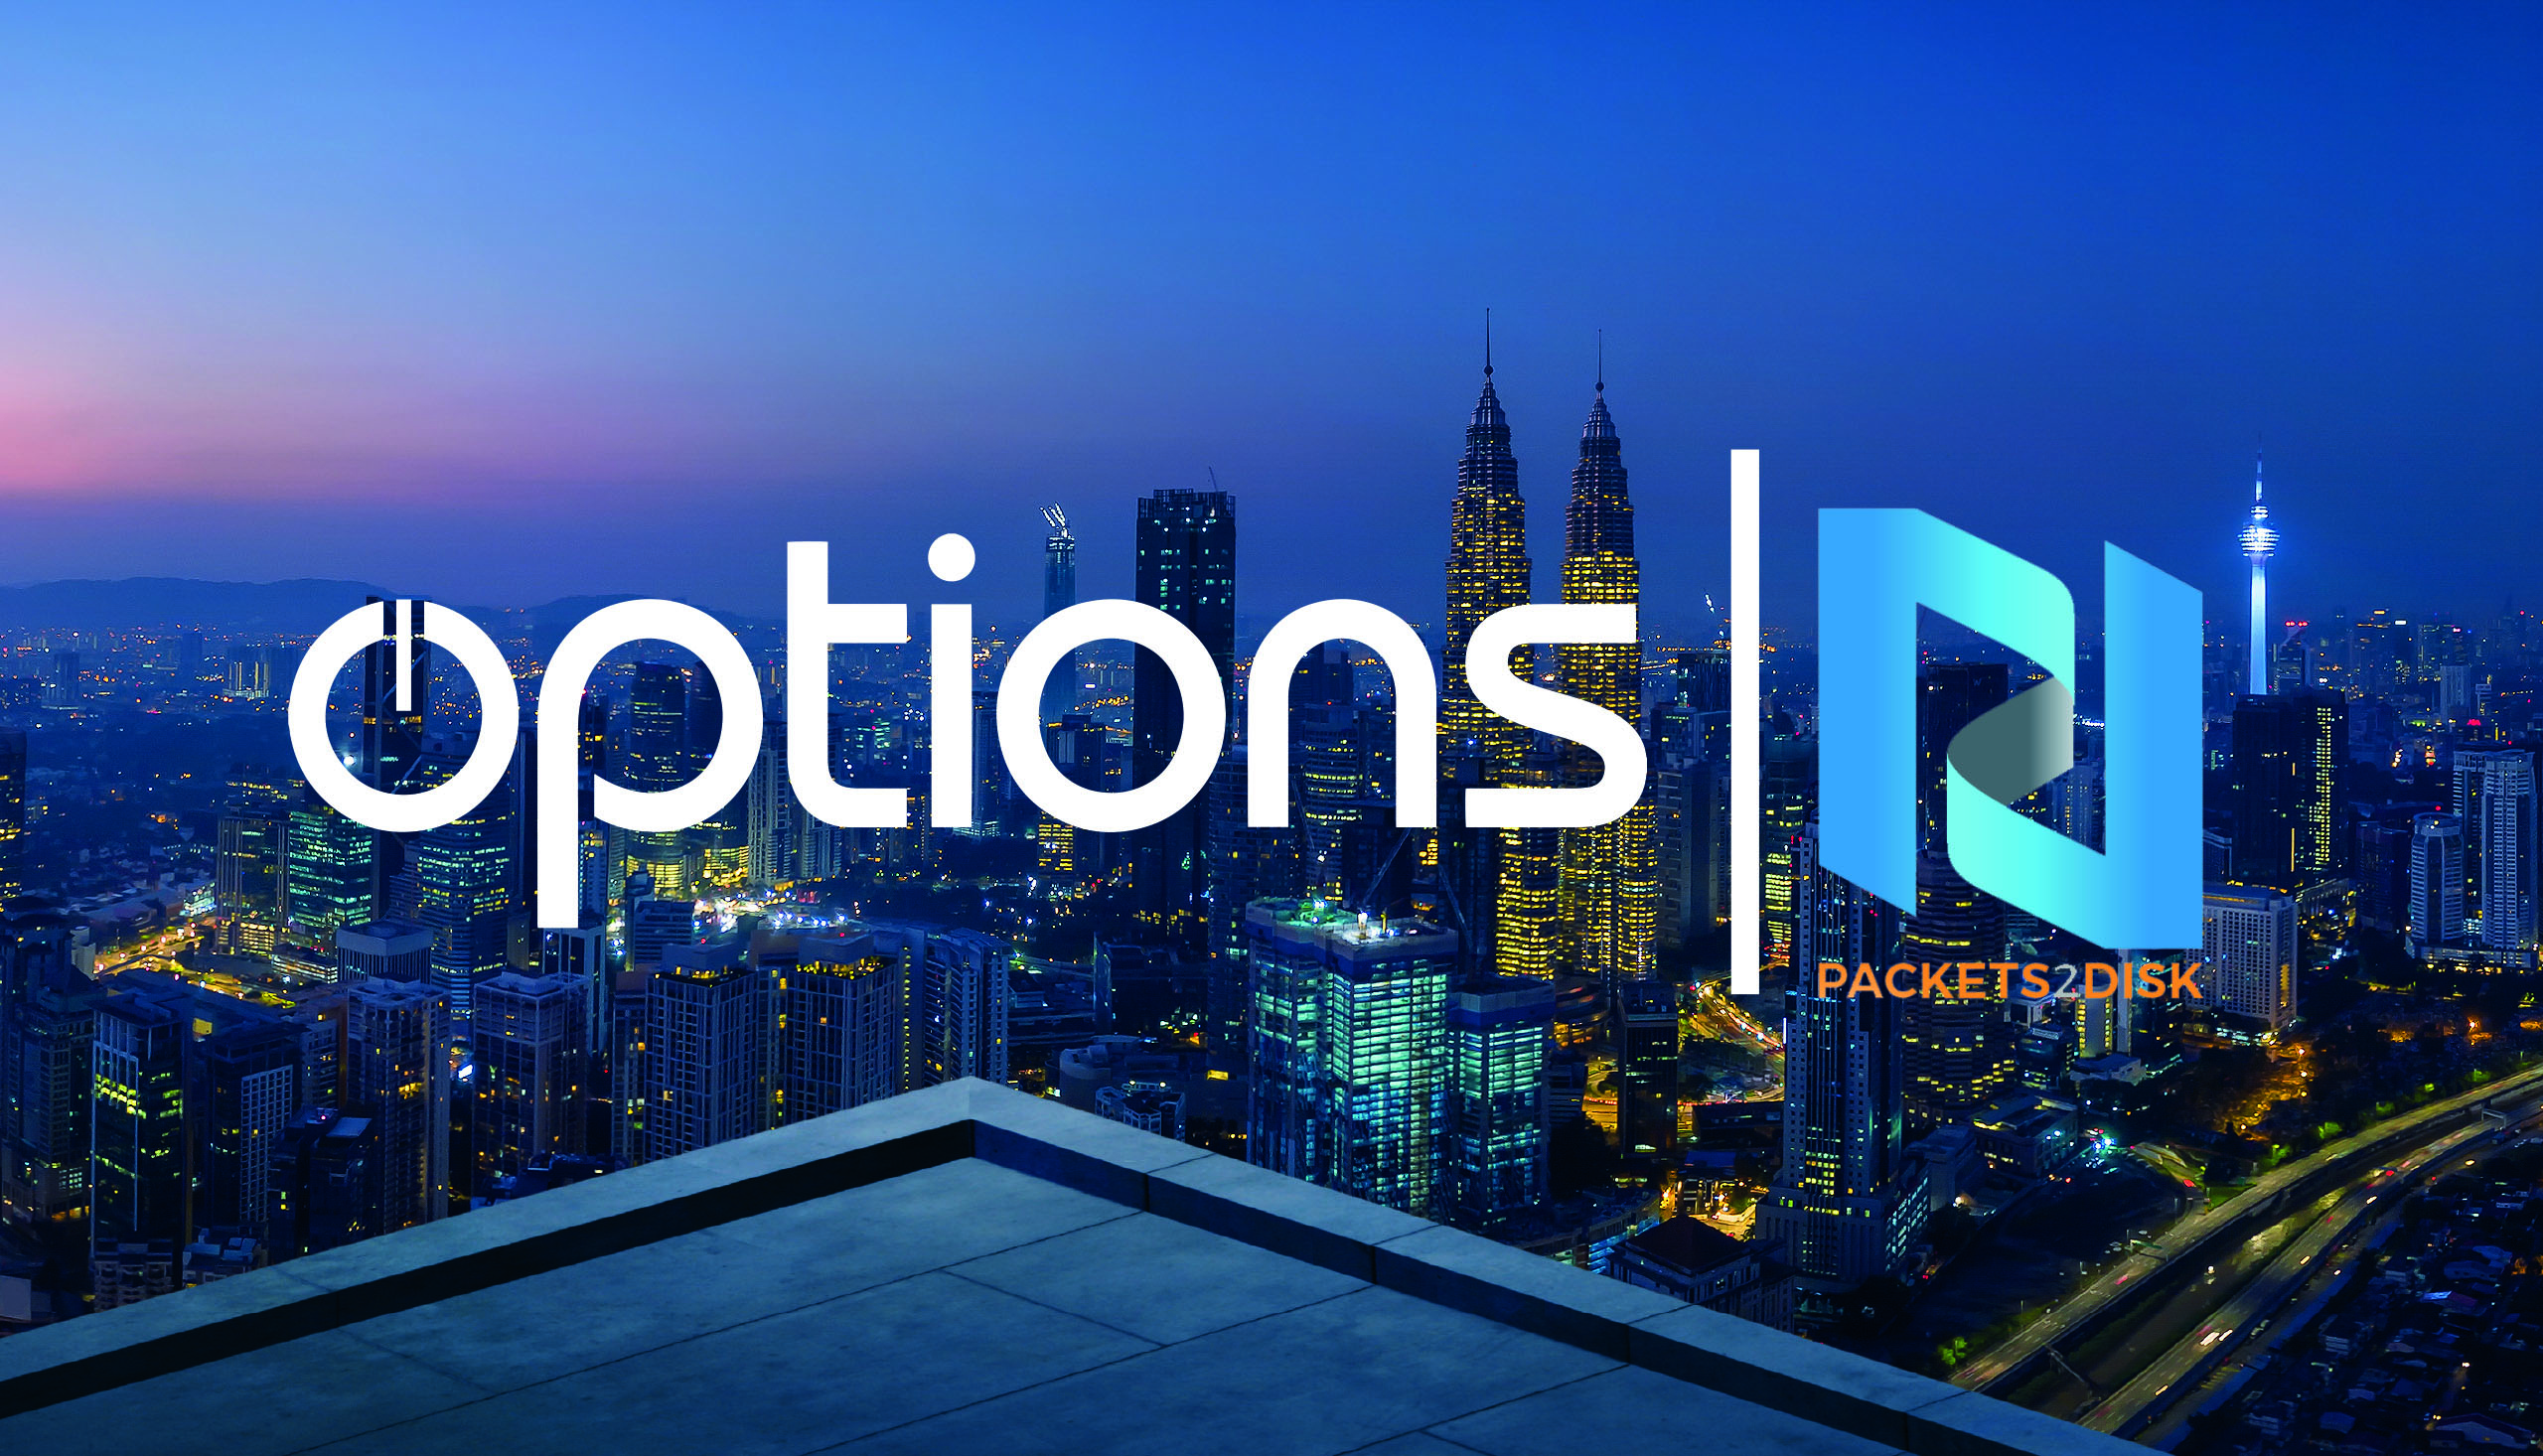 You are currently viewing <a><strong>Options Announces Partnership with Packets2Disk To Provide Market Leading Network Analytics Solution</strong></a><strong>  </strong>